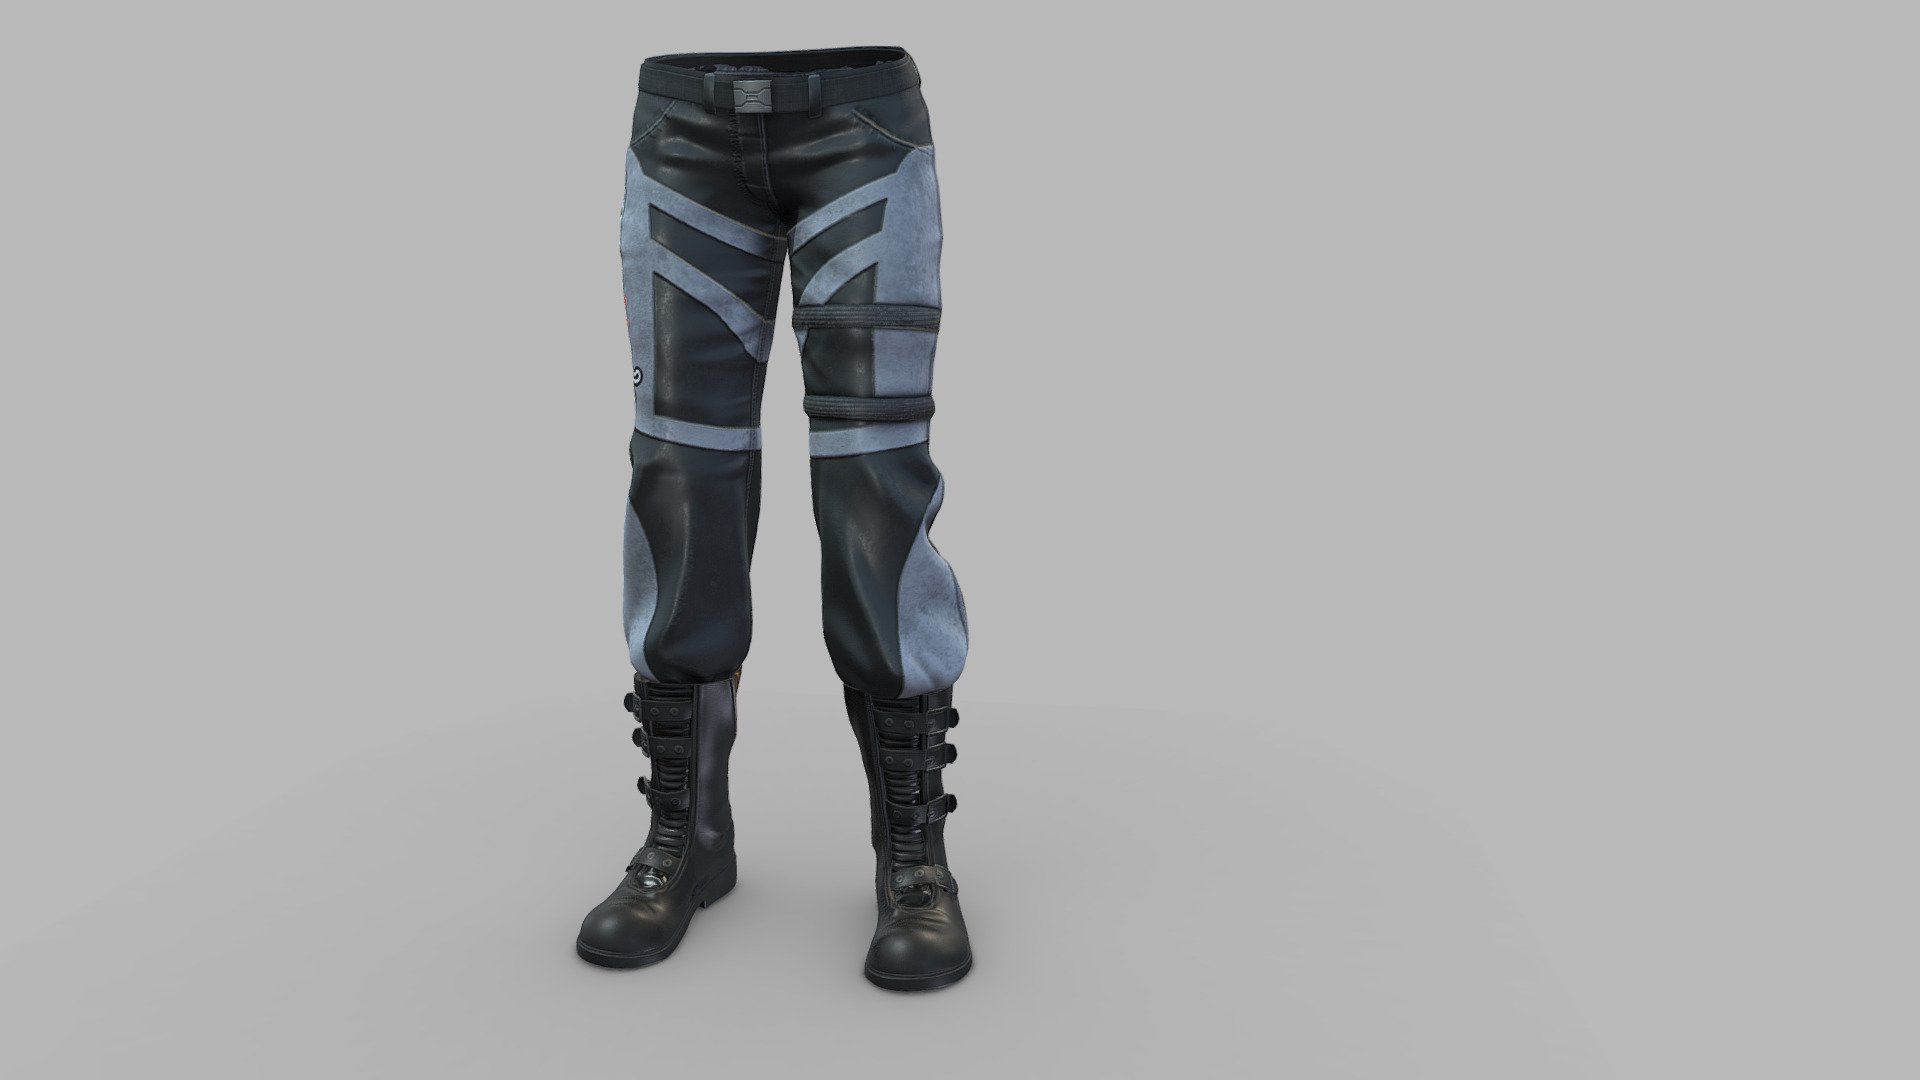 Pants + Boots

Can be fitted to any character

Clean topology

No overlapping smart optimum unwrapped UVs

High-quality realistic textures

FBX, OBJ, gITF, USDZ (request other formats)

PBR or Classic

Please ask any other questions.

Type     user:3dia &ldquo;search term